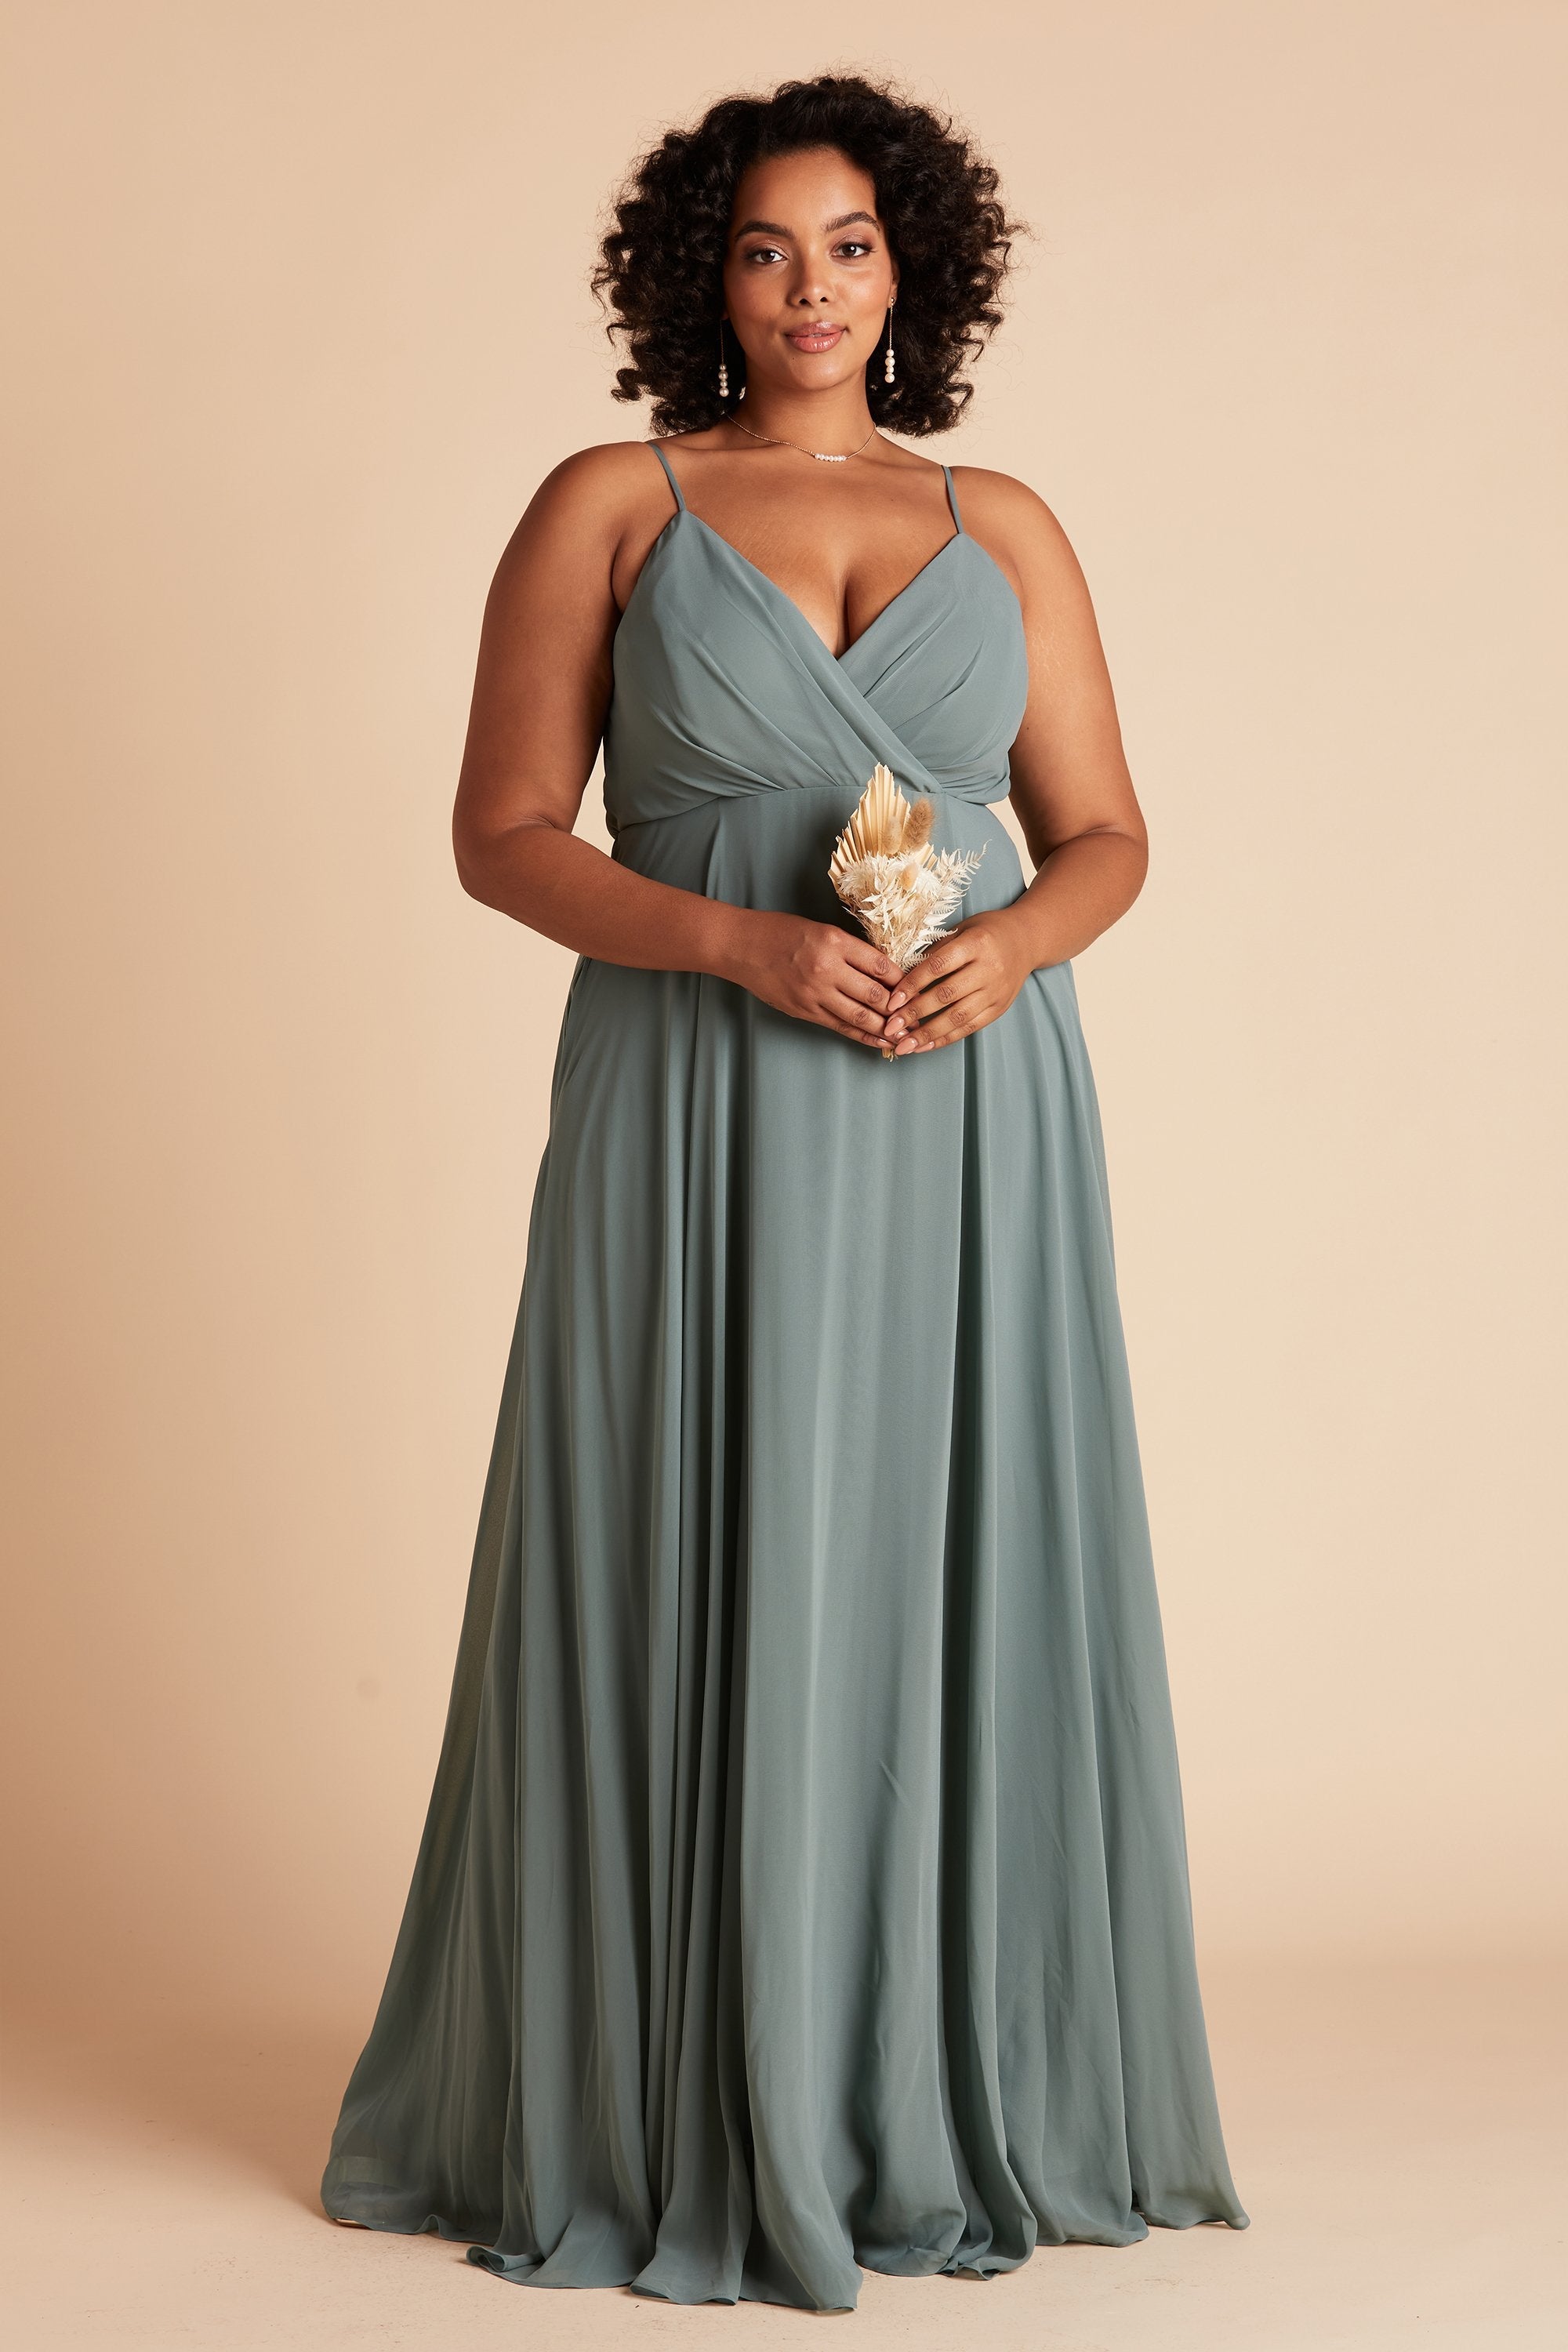 Front view of the floor-length Kaia Dress Curve in sea glass chiffon shows a full-figured model with a medium skin tone wearing a spaghetti strap V-neck dress with a raised empire waistline wraps across their full bosom showing cleavage.